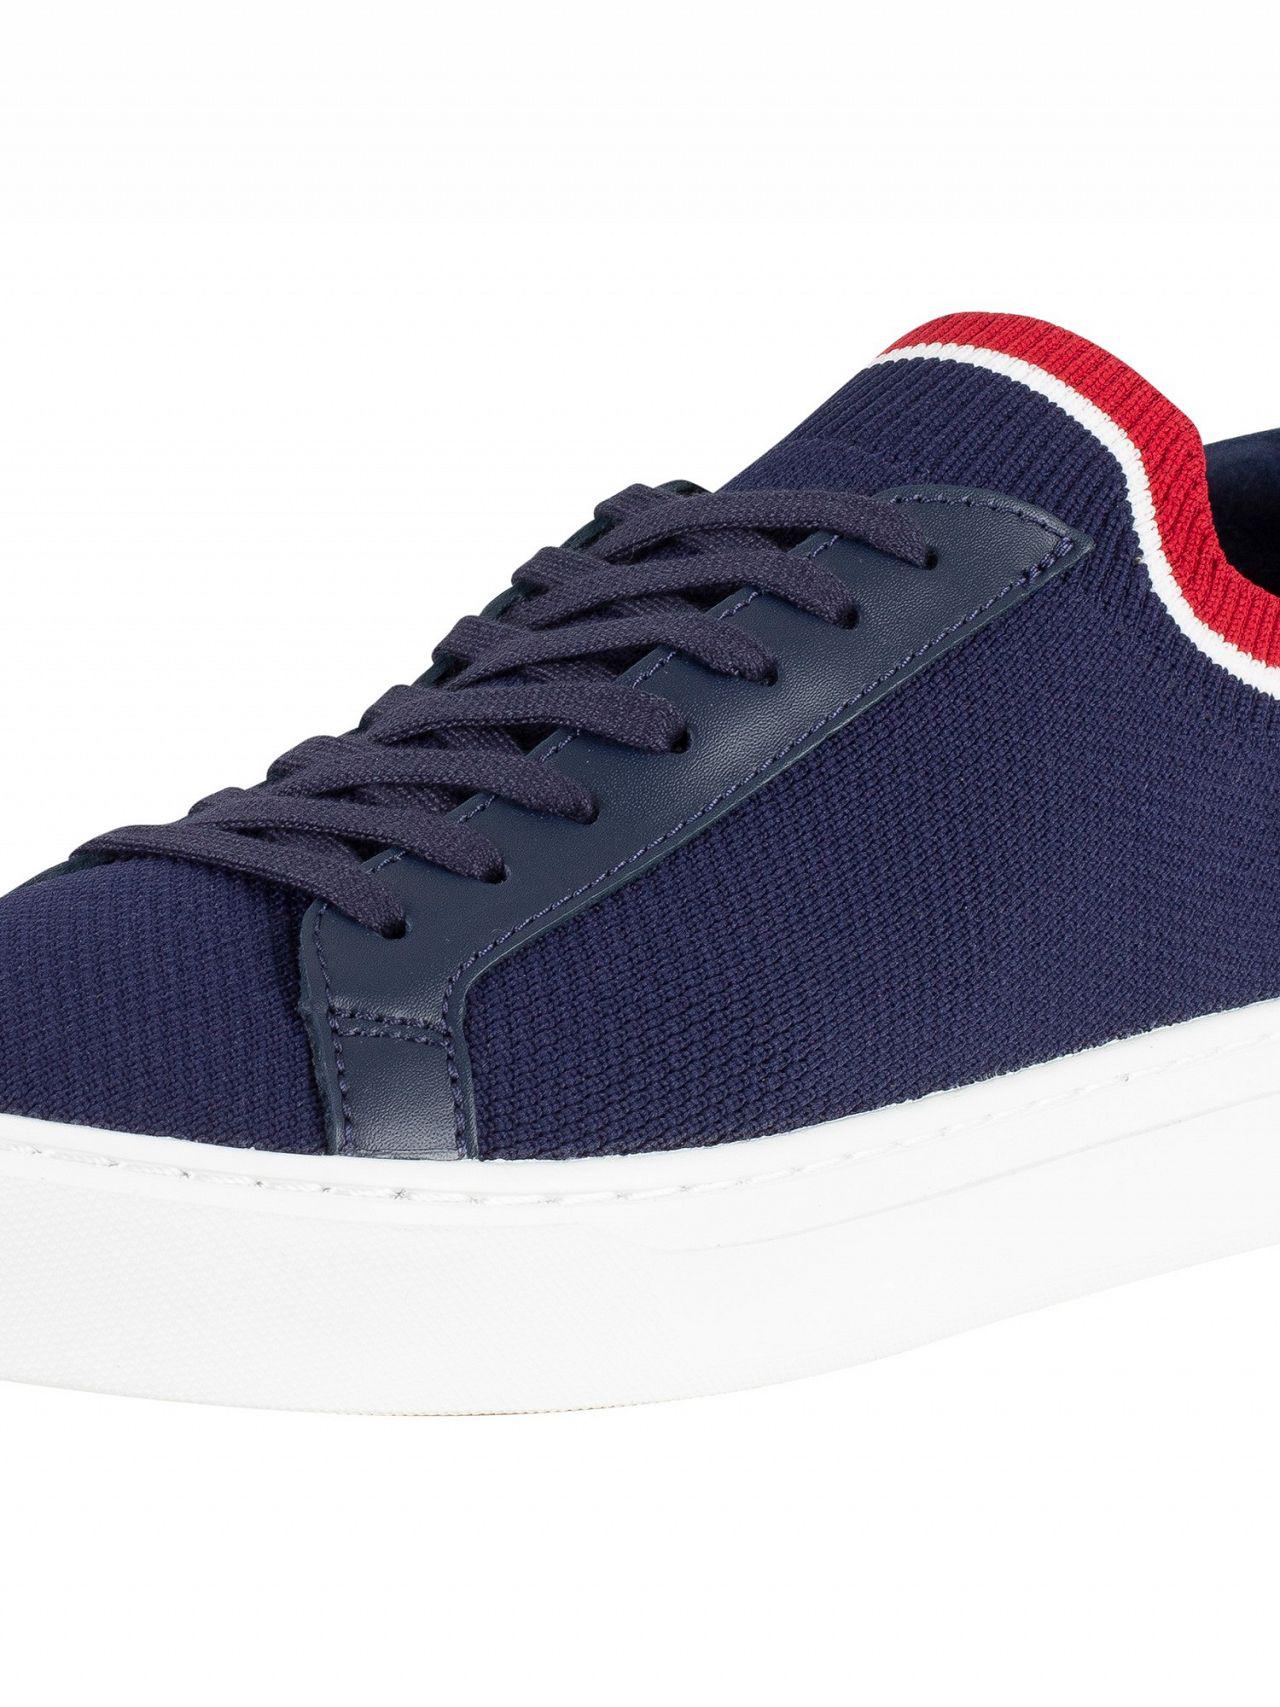 Lacoste Navy/white/red La Piquee 119 1 Cma Trainers in Blue for Men | Lyst